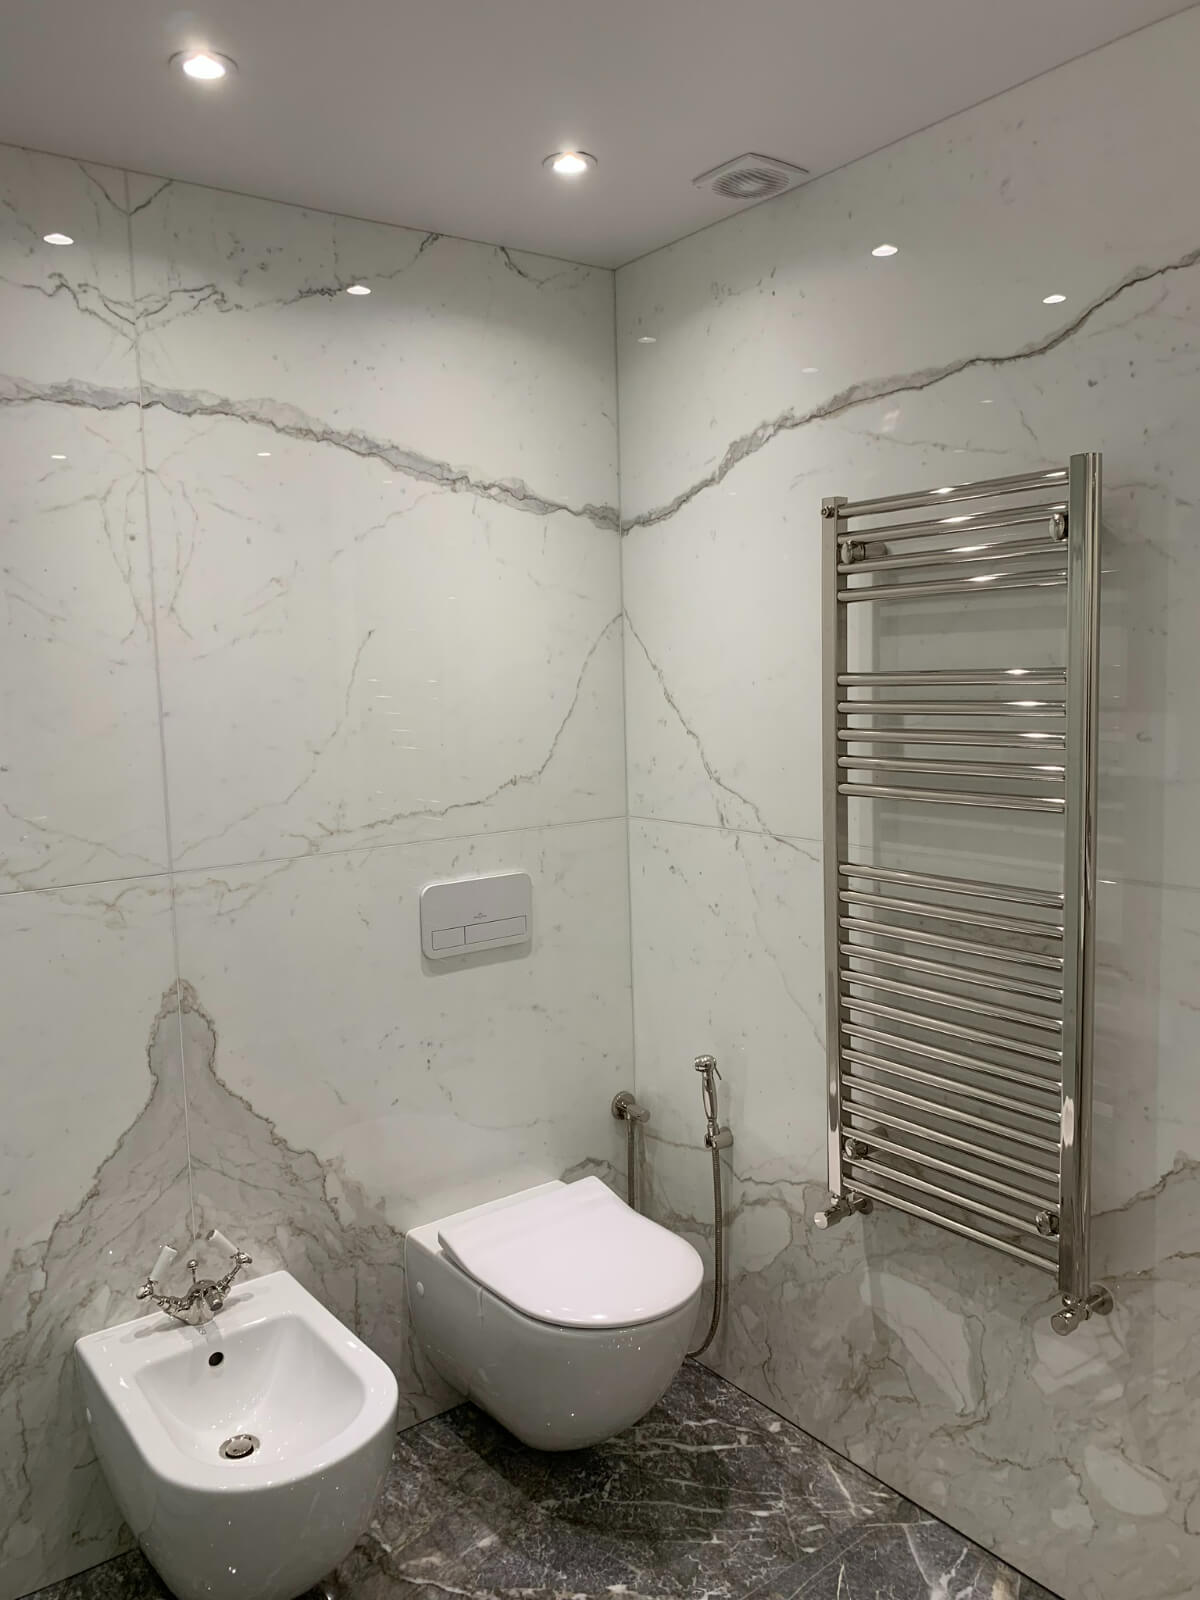 A bathroom with white marble walls and a toilet.